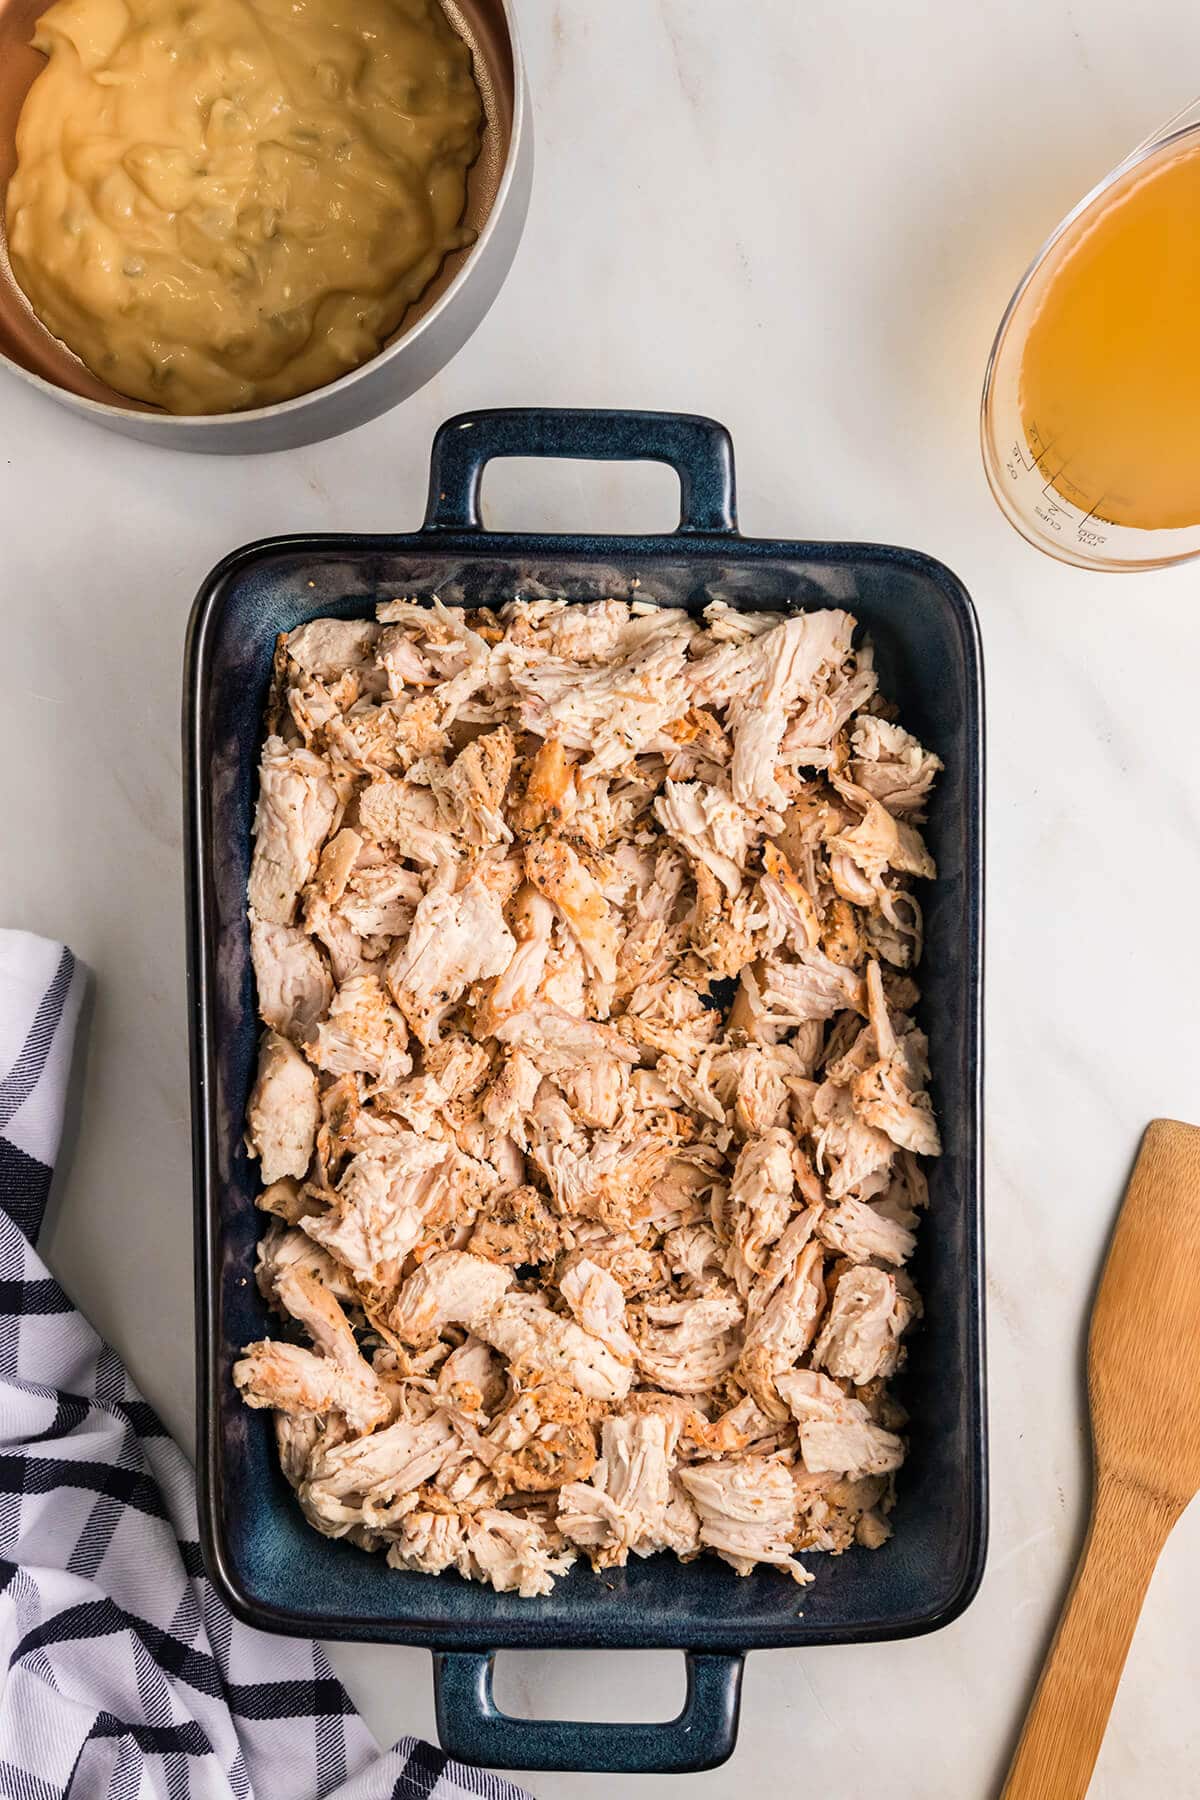 Shredded chicken in a baking dish with a wooden spoon on the side.